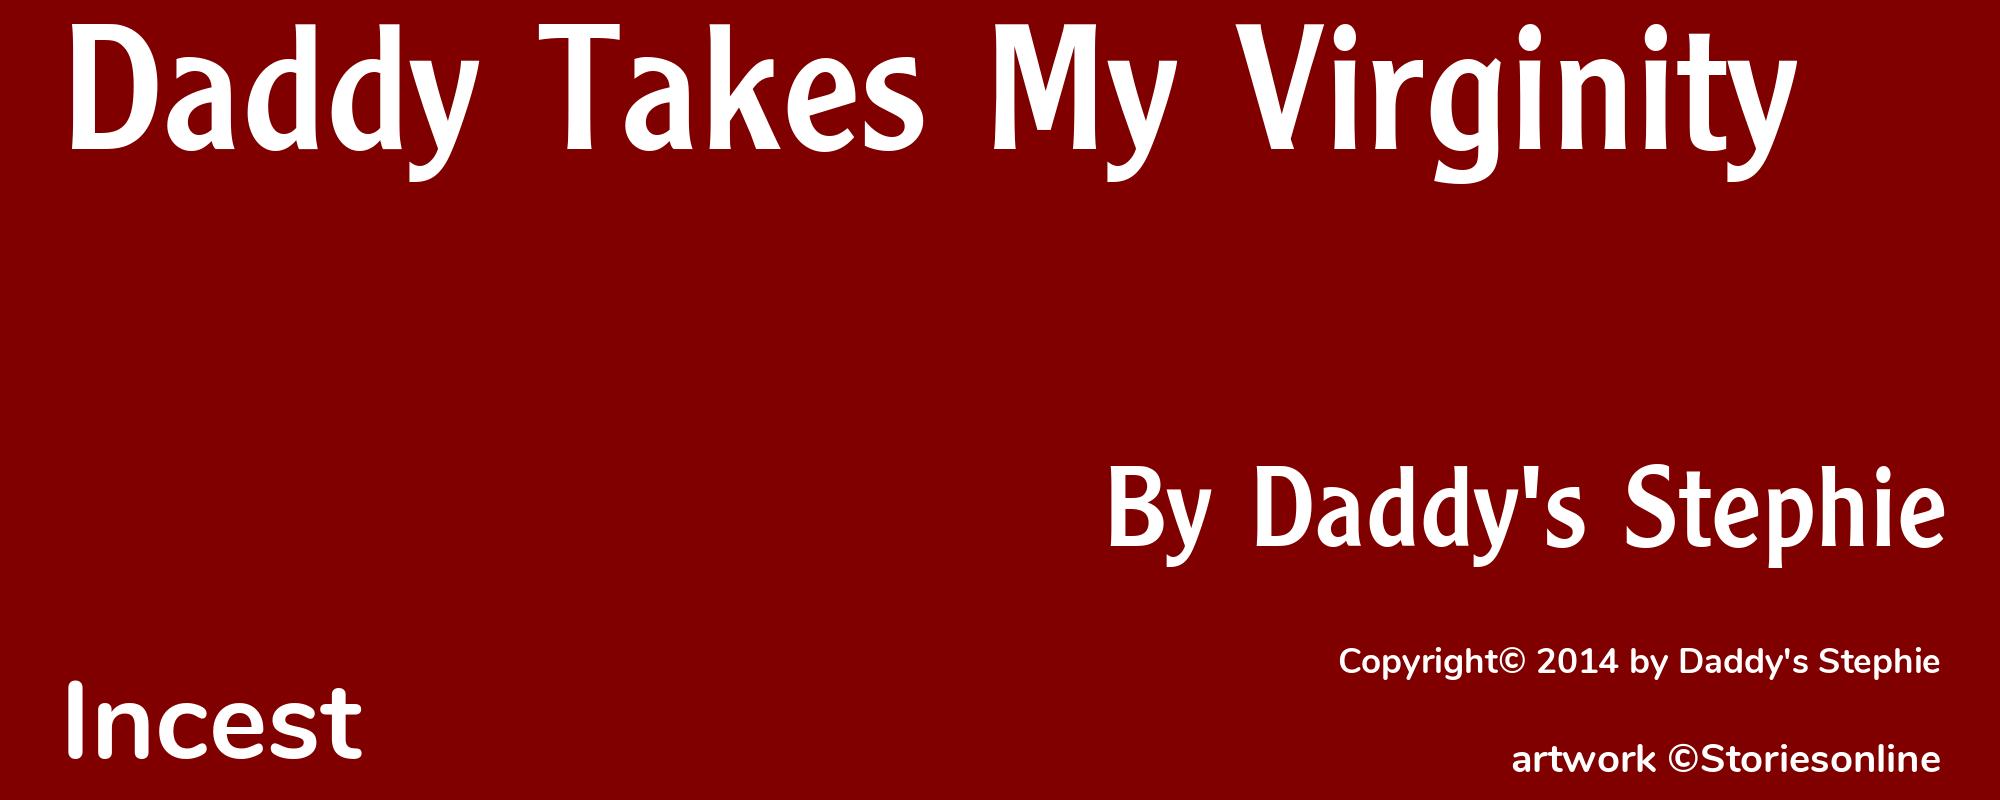 Daddy Takes My Virginity - Cover